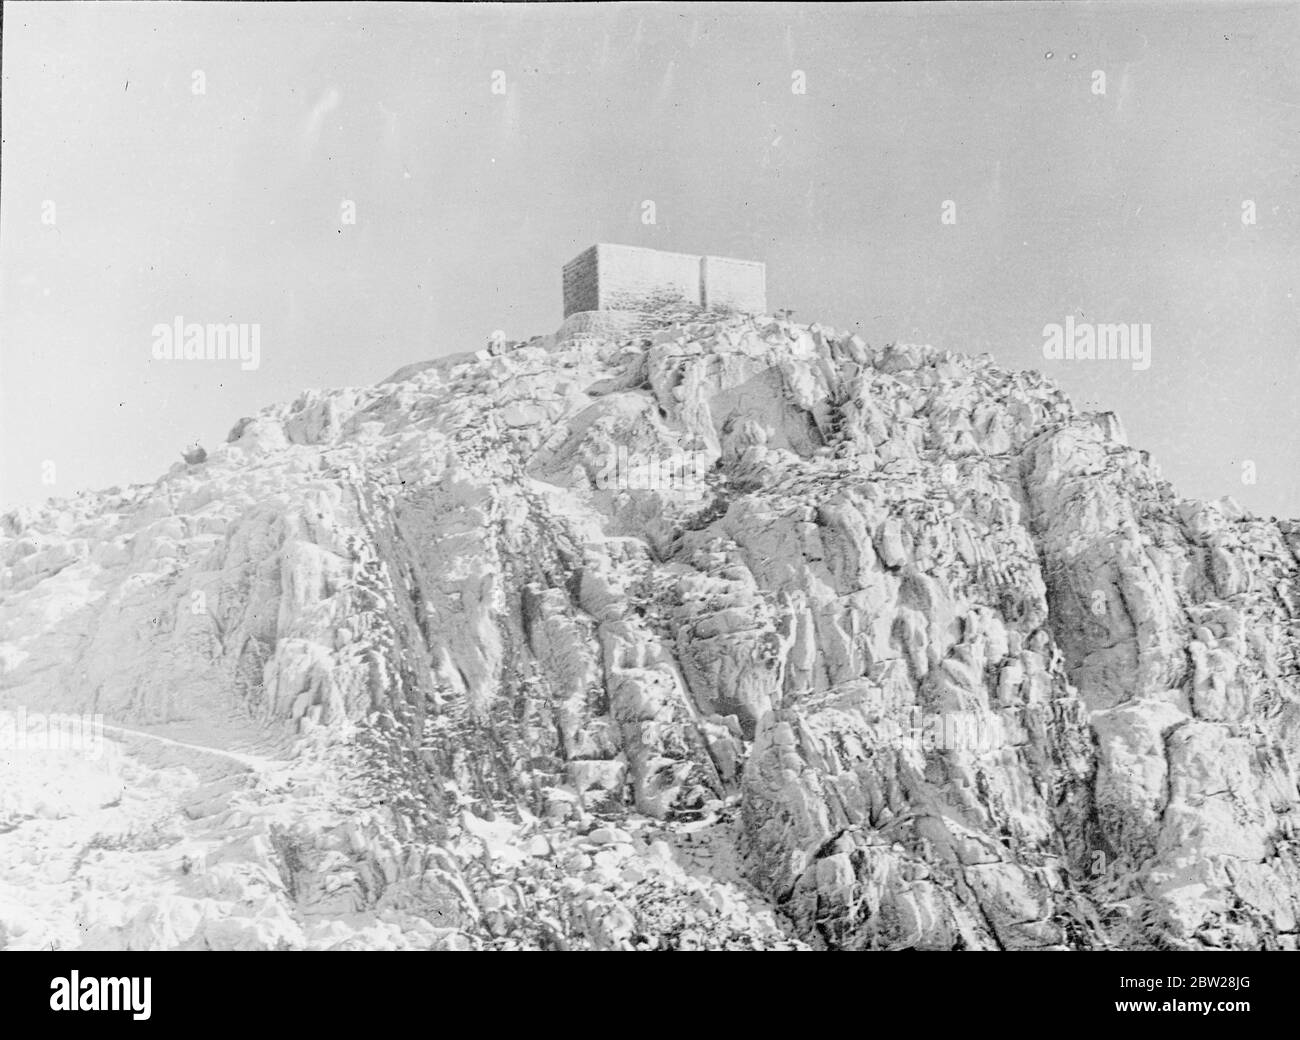 American observatory on the 'The Mount of Moses in Egypt'. Set on the highest peak in Egypt, the rugged, snowcapped Mount Sinai , which rises 11,000 feet above the arid deserts of the Sinai Peninsular, is the Solar Observatory of the Smithsonian Institution of America. Here, a staff of scientists carry out their observations of the heavens. Mount Sinai, which is on the peninsula of the head of the Red Sea, between the Gulfs of Akabah and Suez, is known to the Arabs as 'Tebel Muse', Mount of Moses. Photo shows, the lonely solar observatory of the Smithsonian Institution on the peak of rugged Mo Stock Photo